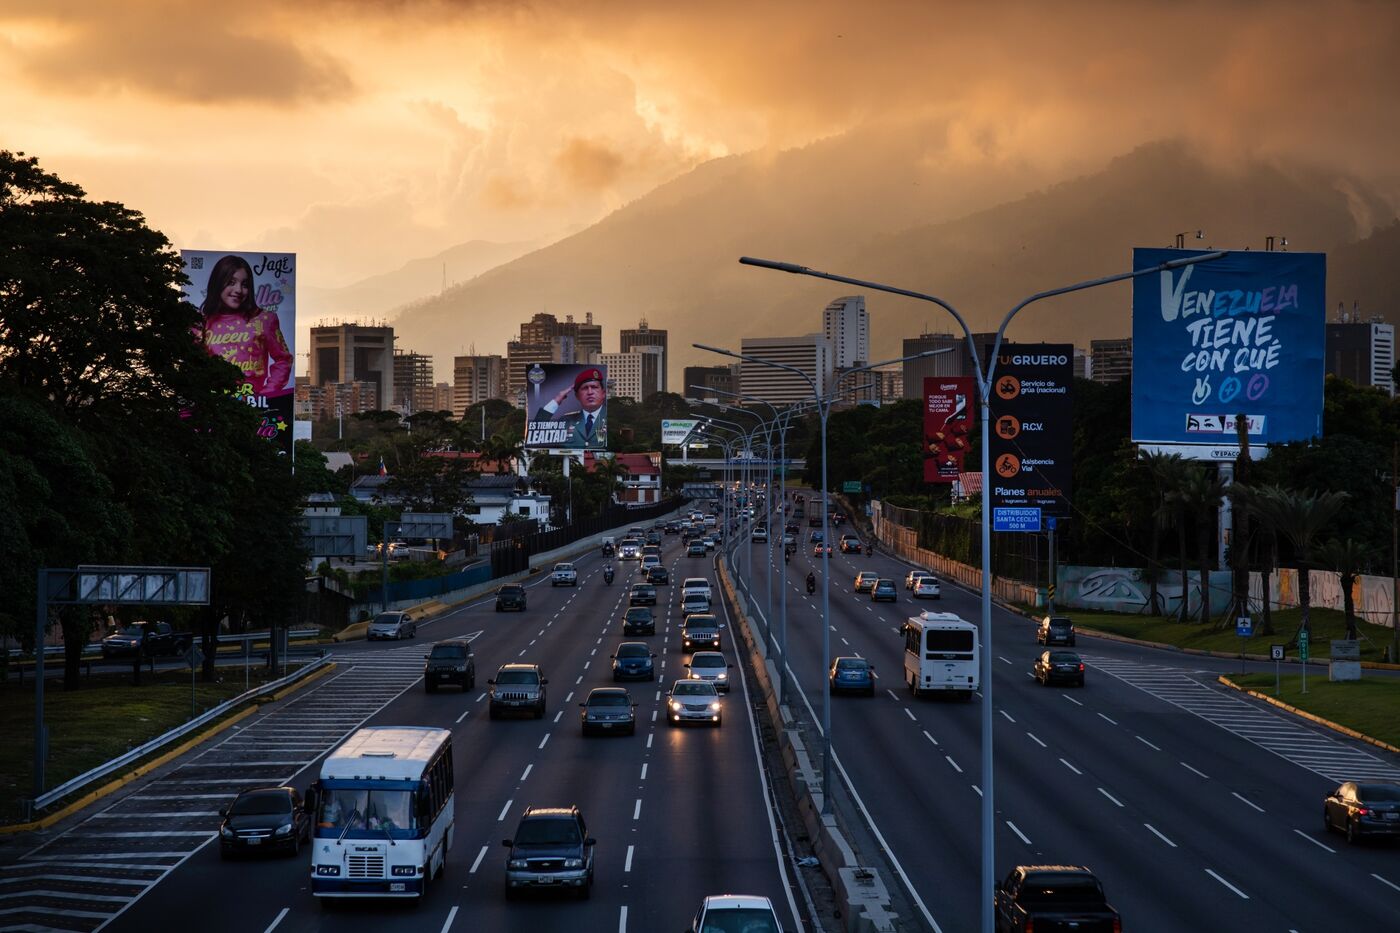 Government-issued billboards compete with commercial advertisements along the main artery&nbsp;in Caracas, Venezuela.&nbsp;